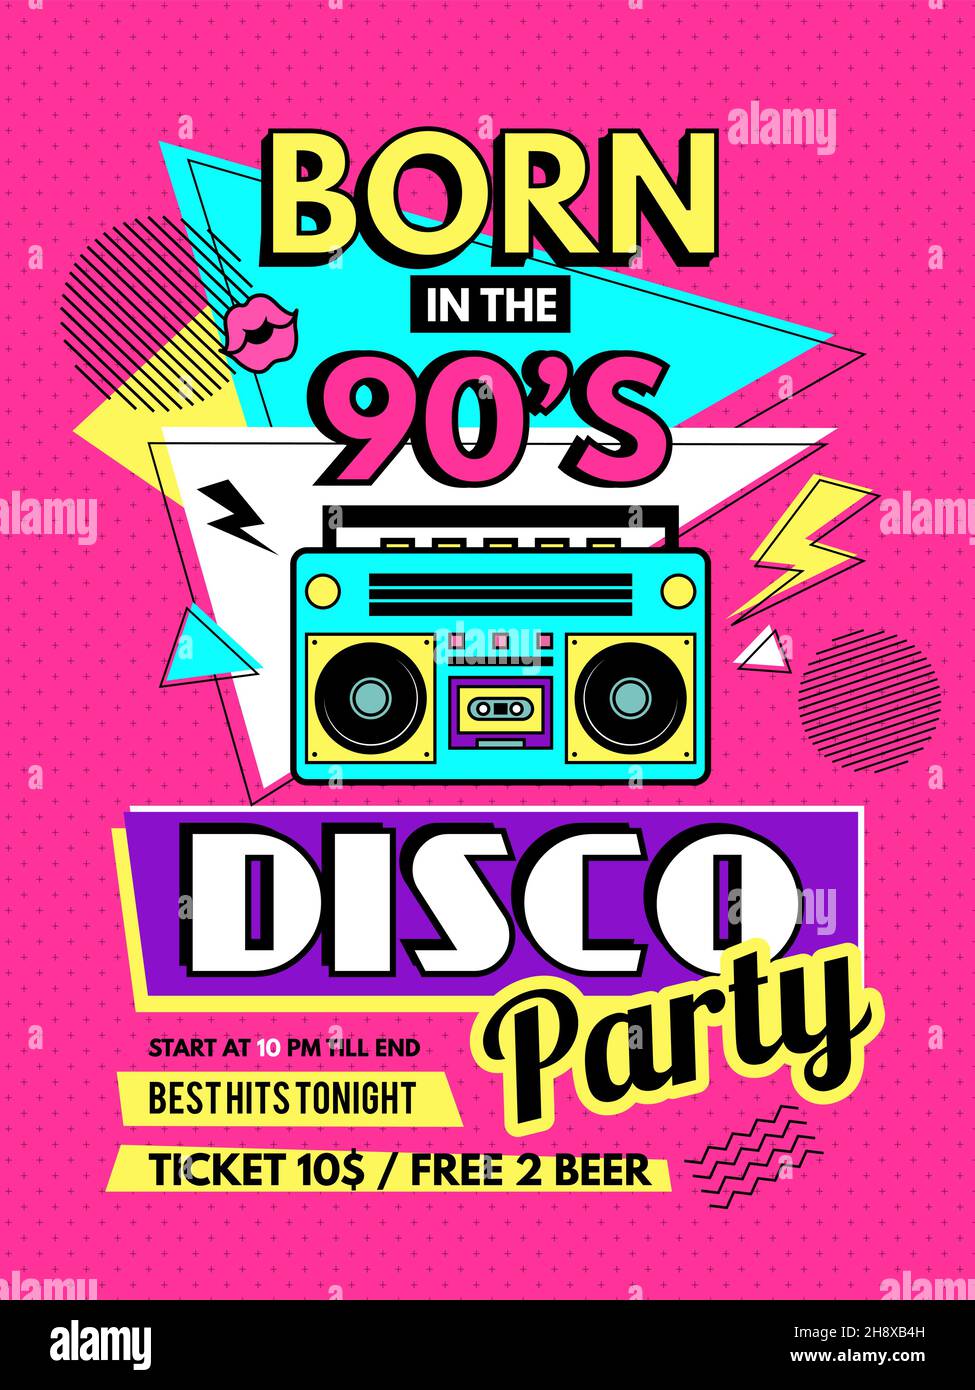 Retro poster. 80s style placard party invitation 90s music elements radio boombox recent vector template for design projects Stock Vector